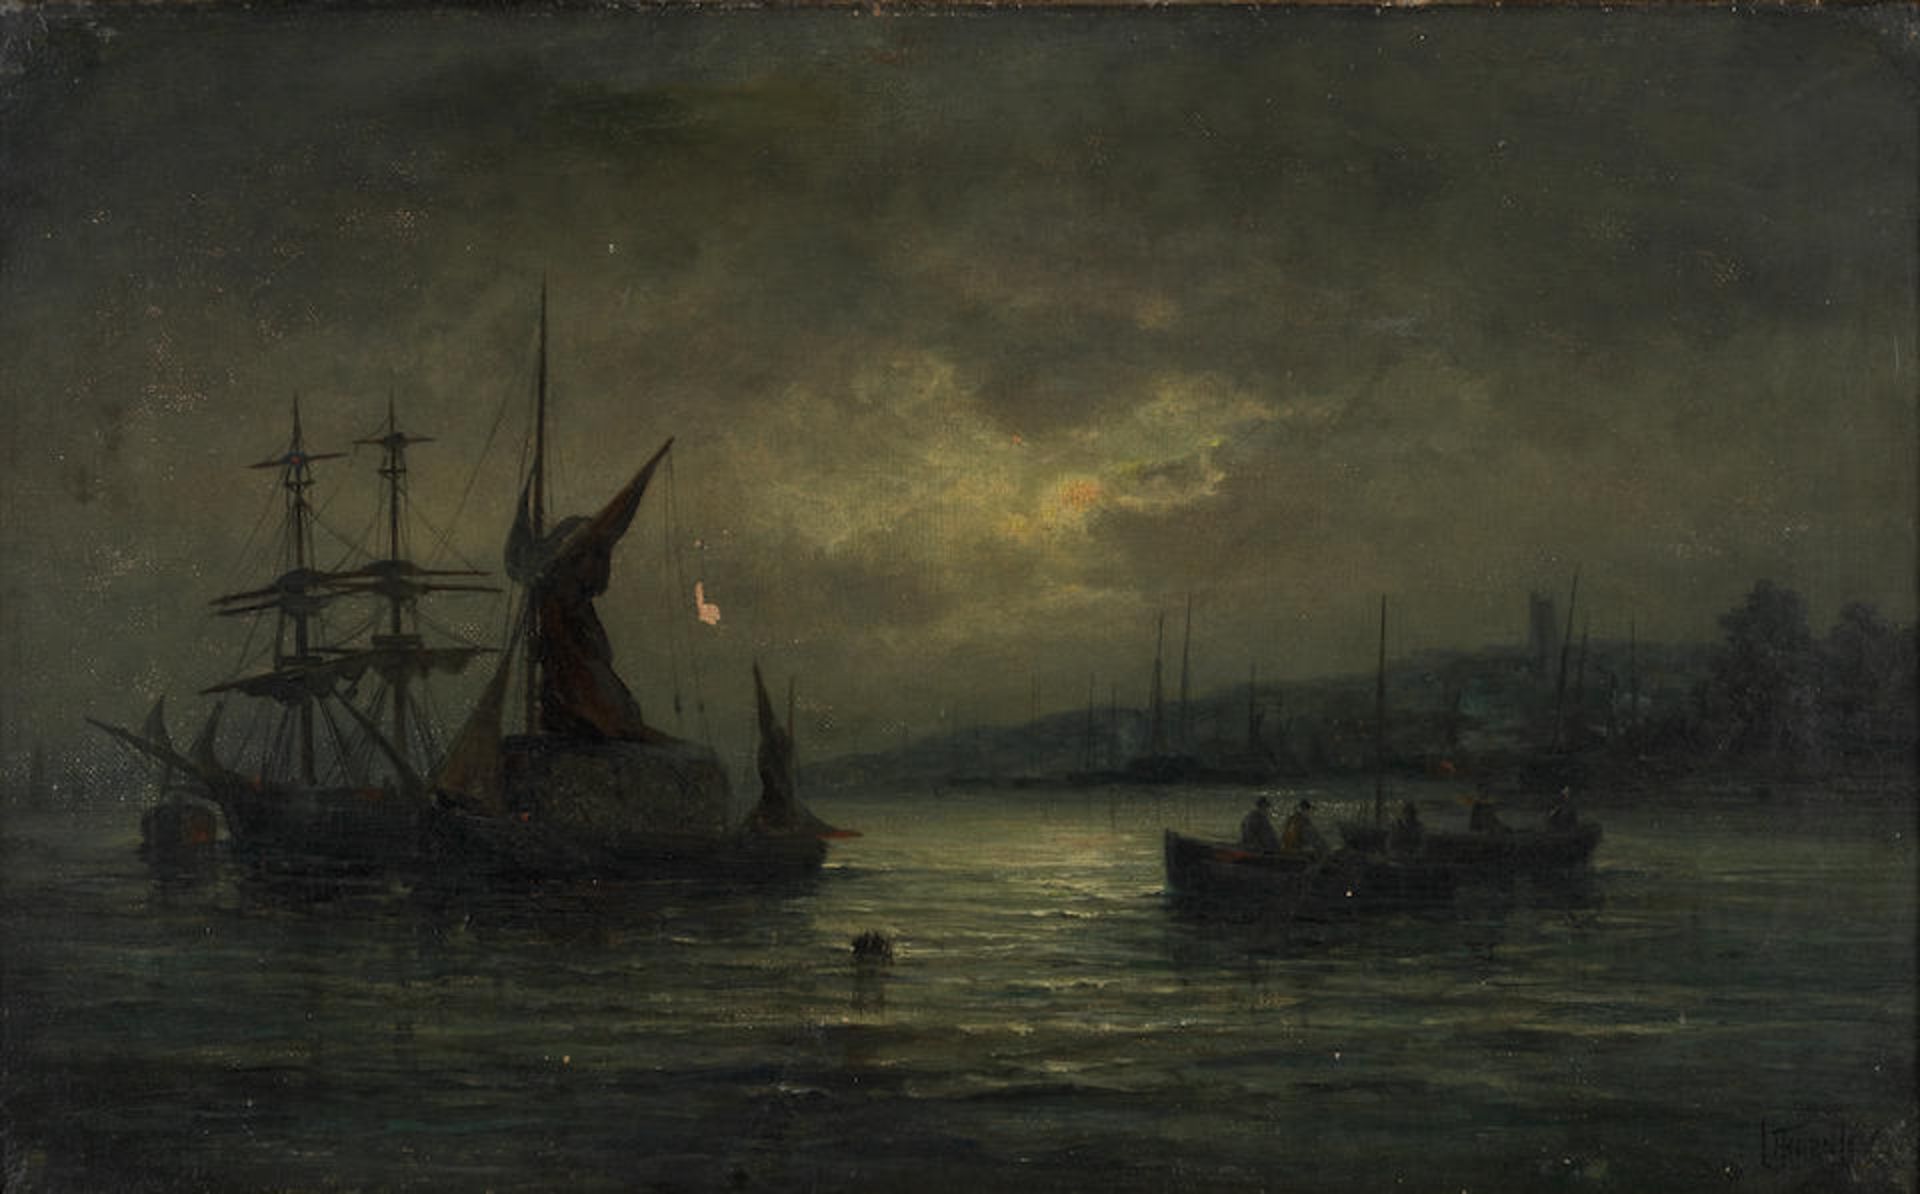 William Anslow Thornbery (British, 1847-1907) alias 'Thornley' Moonlight on the Medway